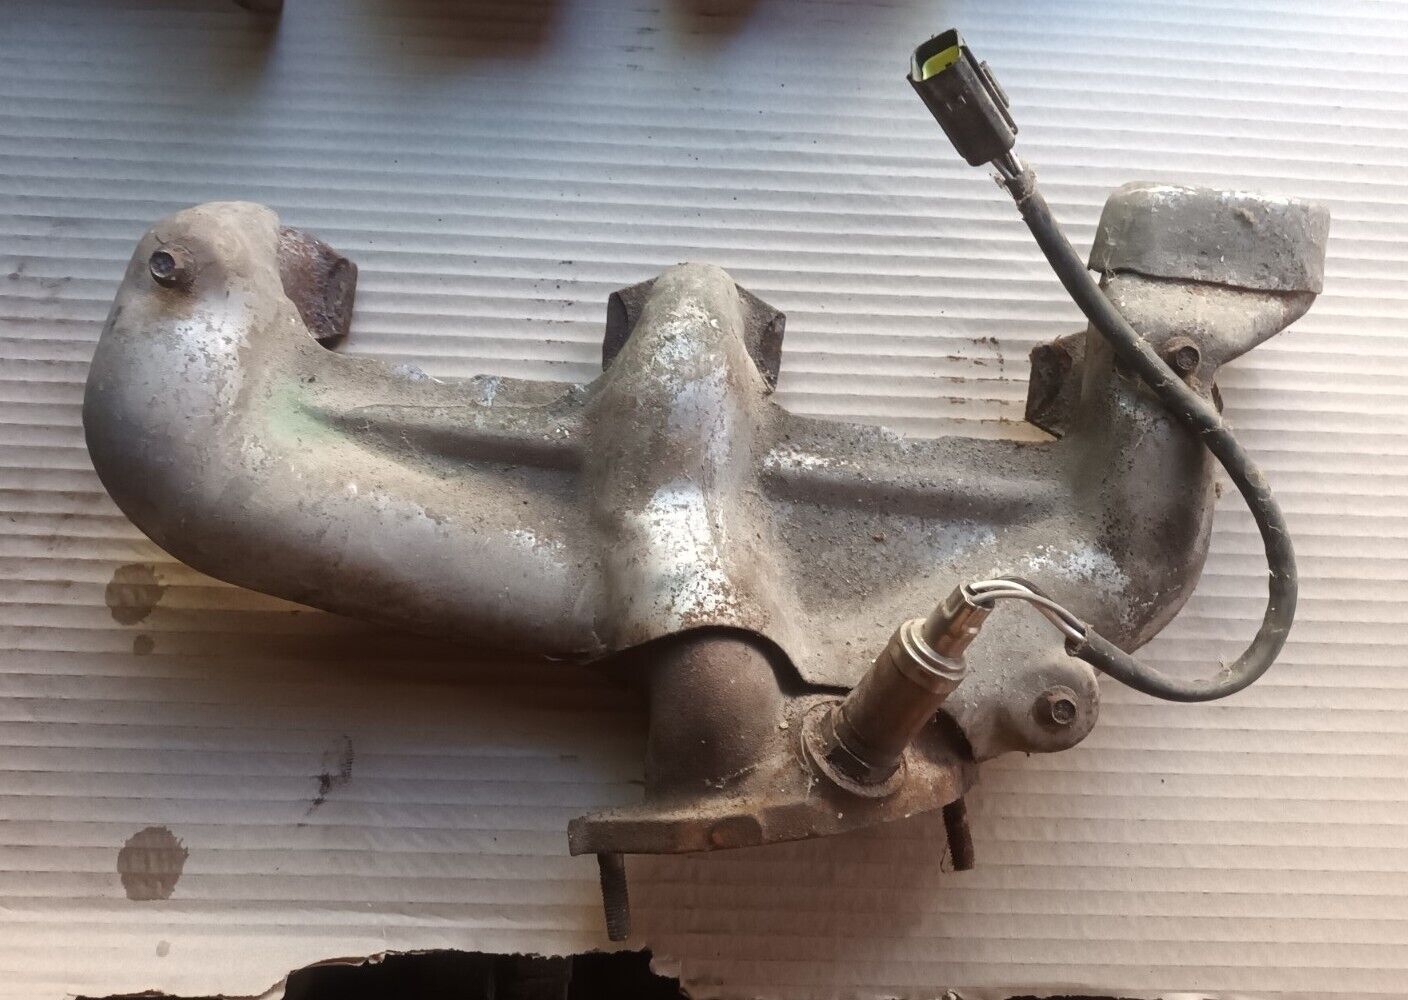 MINI ROVER COOPER INJECTION EXHAUST MANIFOLD SPI MPI 1275 ENGINE 1300